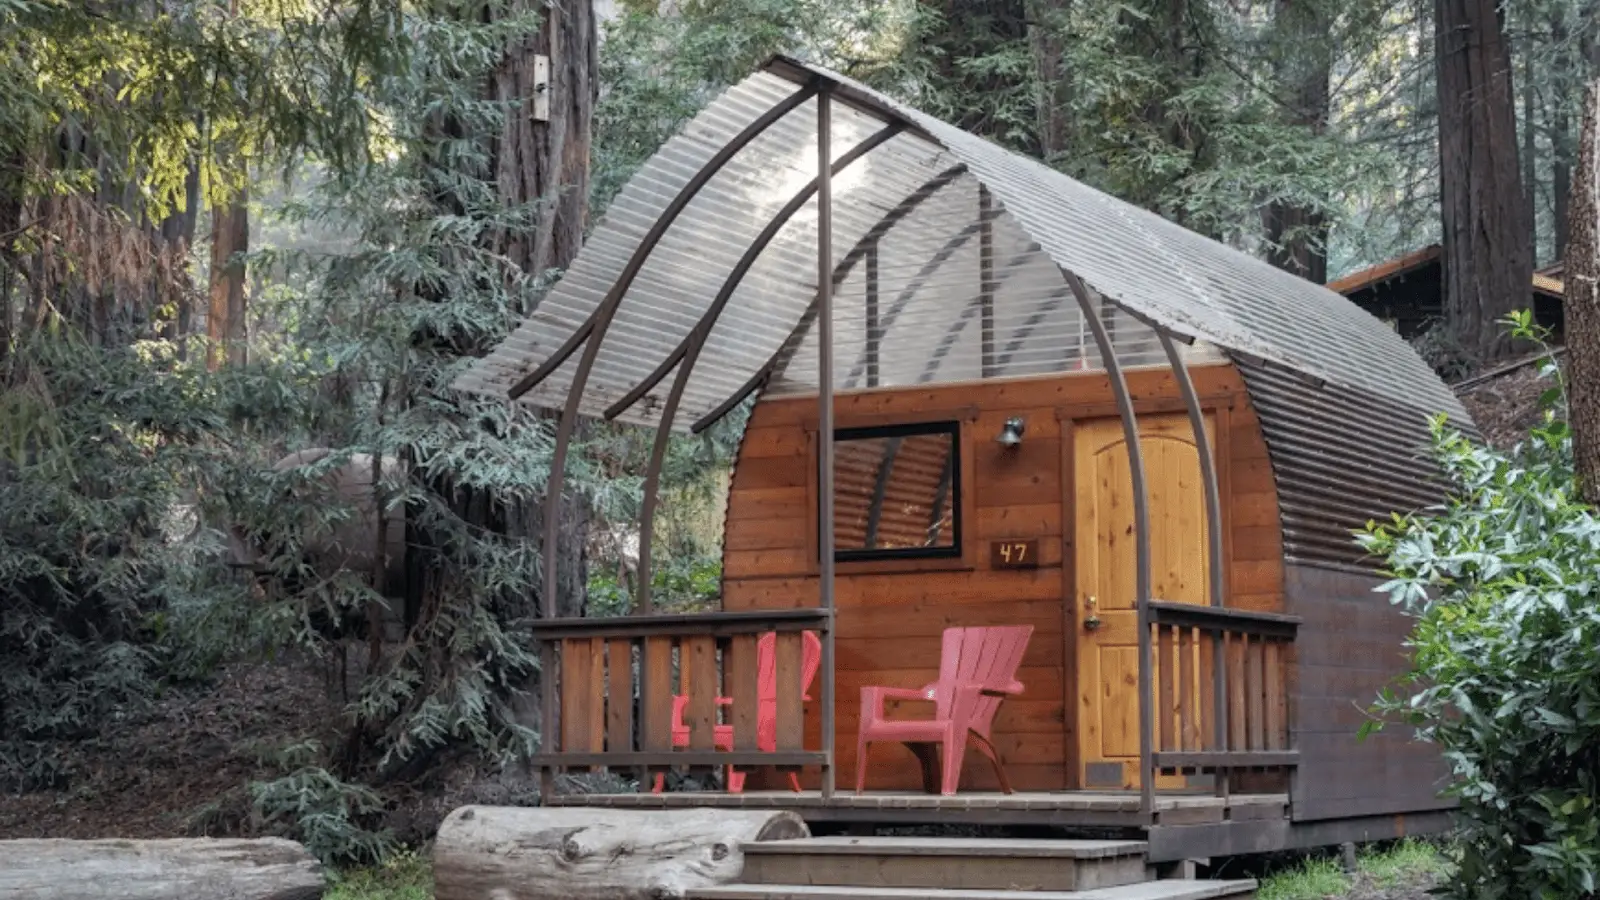 A small, rustic wooden cabin with a curved metal roof stands among tall trees on the Monterey Peninsula. Two red Adirondack chairs sit on the front porch alongside a small wooden table, creating a cozy outdoor seating area. The cabin is surrounded by lush greenery and forest.